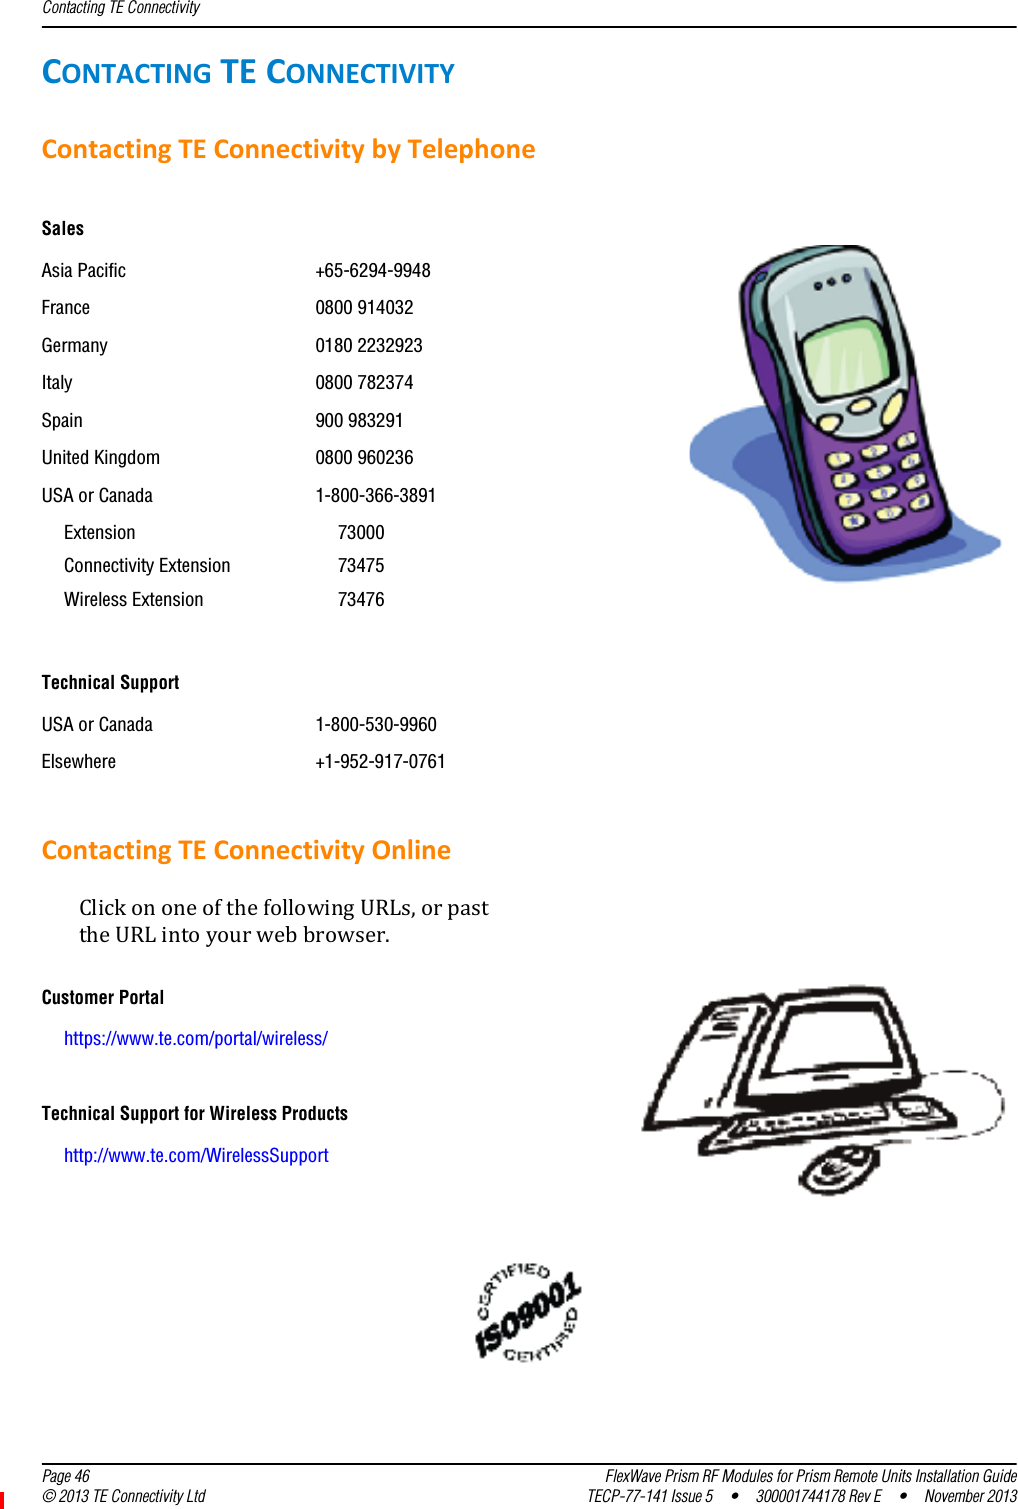 Contacting TE Connectivity  Page 46 FlexWave Prism RF Modules for Prism Remote Units Installation Guide© 2013 TE Connectivity Ltd TECP-77-141 Issue 5  •  300001744178 Rev E  •  November 2013CONTACTINGTECONNECTIVITYContactingTEConnectivitybyTelephoneContactingTEConnectivityOnlineClickononeofthefollowingURLs,orpasttheURLintoyourwebbrowser.SalesAsia Pacific +65-6294-9948France 0800 914032Germany 0180 2232923Italy 0800 782374Spain 900 983291United Kingdom 0800 960236USA or Canada 1-800-366-3891Extension 73000Connectivity Extension 73475Wireless Extension 73476Technical SupportUSA or Canada 1-800-530-9960Elsewhere +1-952-917-0761Customer Portalhttps://www.te.com/portal/wireless/Technical Support for Wireless Productshttp://www.te.com/WirelessSupport 